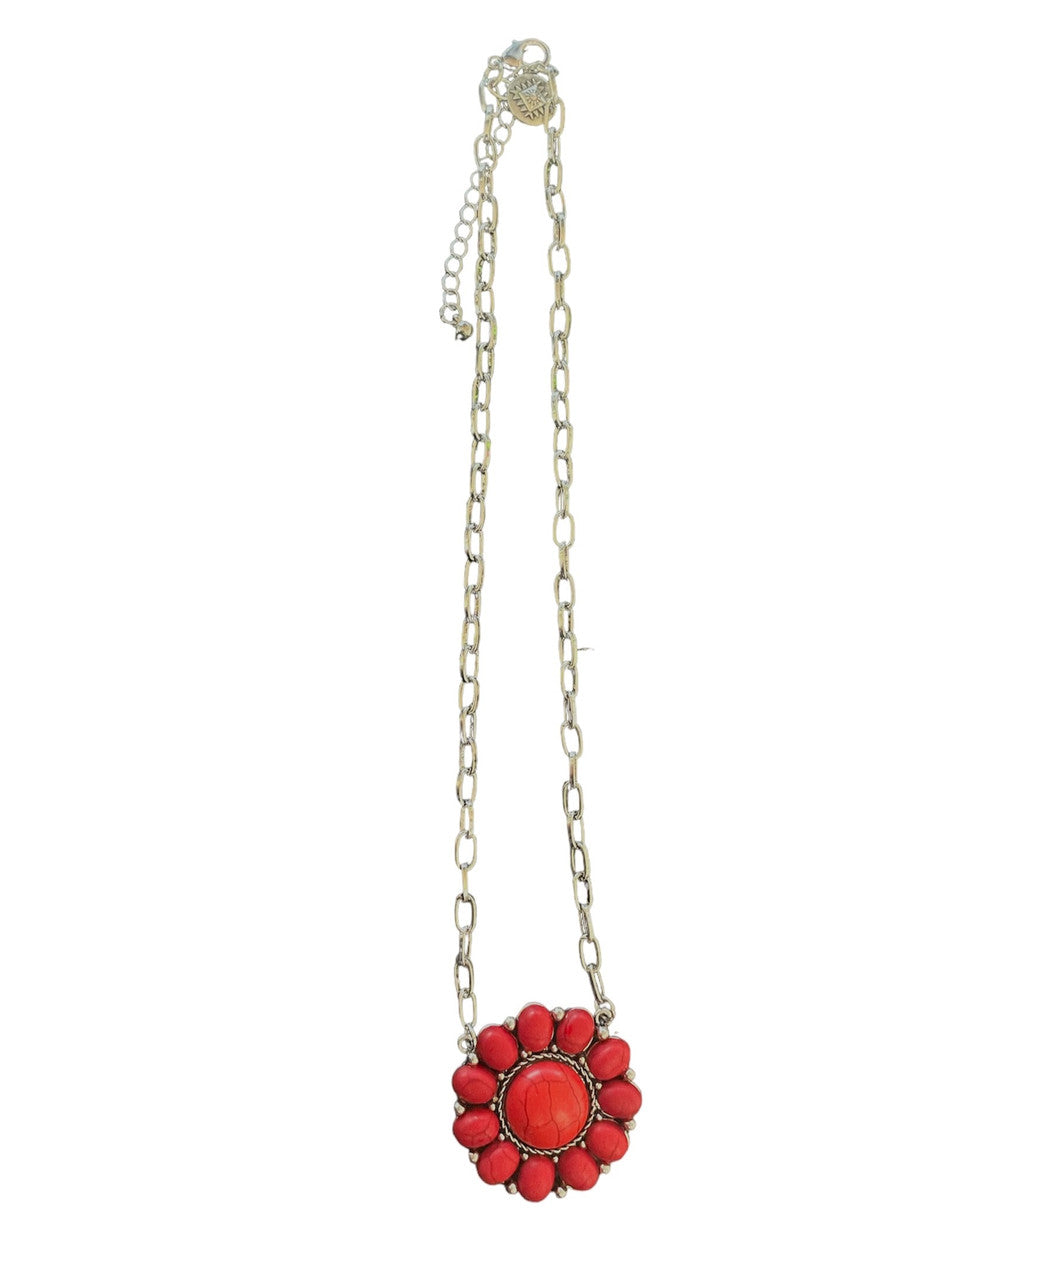 The Red Flower Necklace